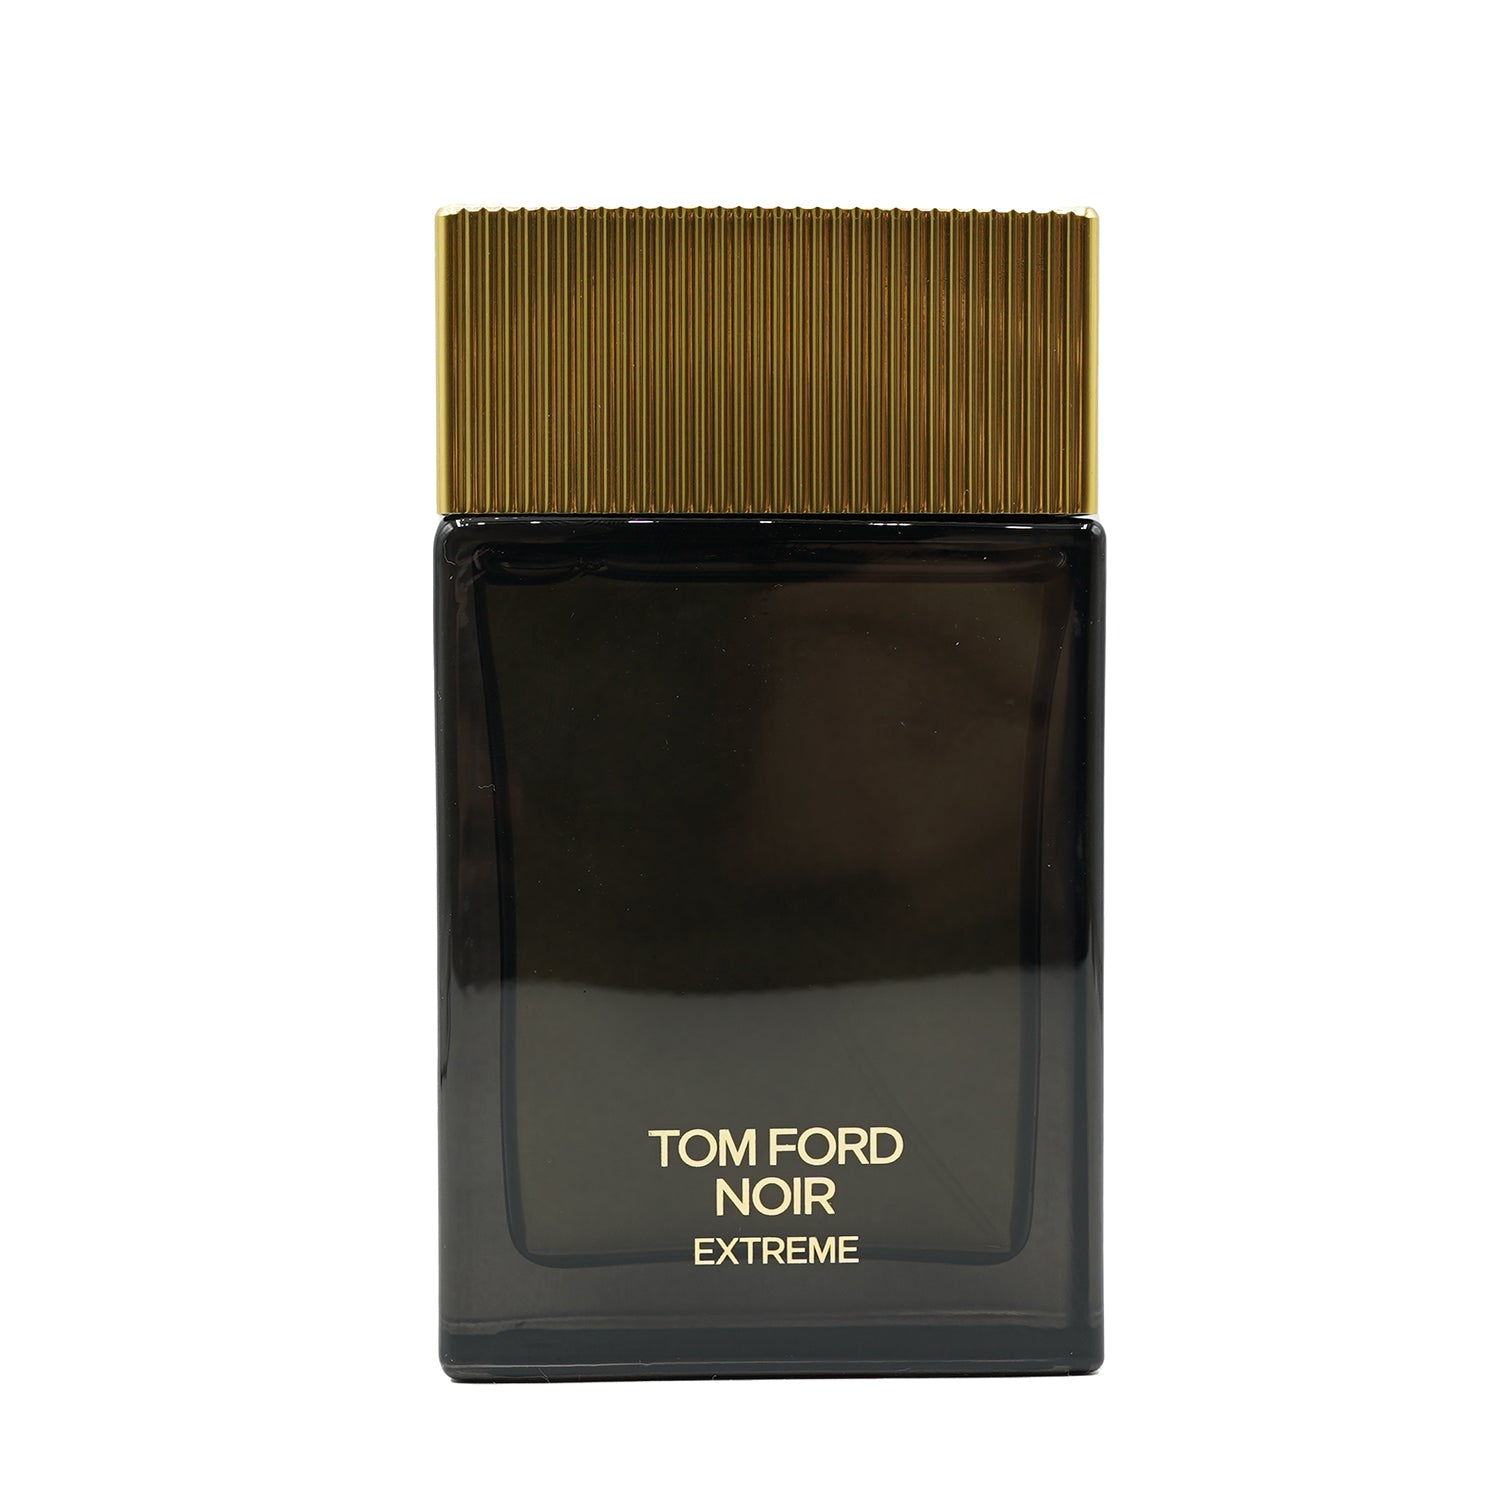 Tom Ford | Noir Extreme EDP embouteillage